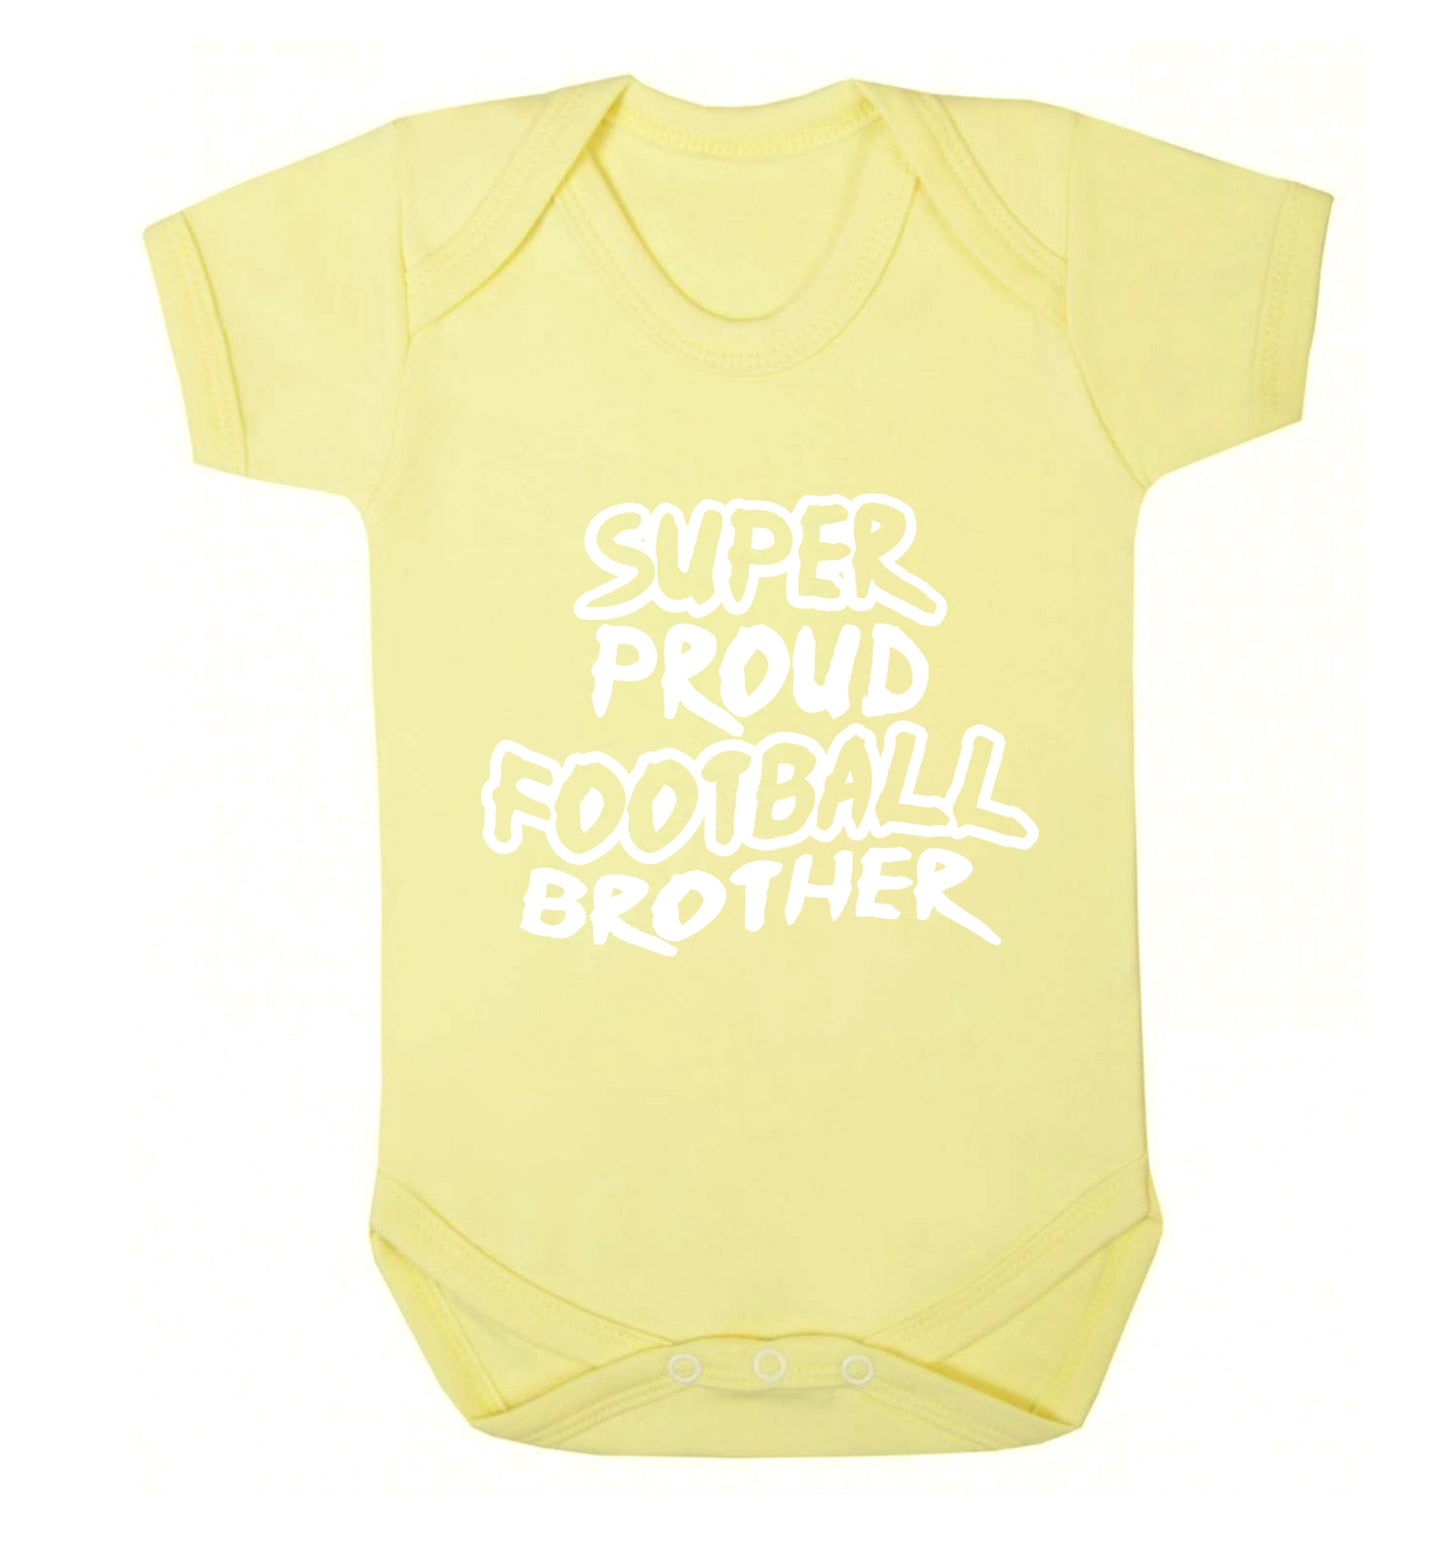 Super proud football brother Baby Vest pale yellow 18-24 months